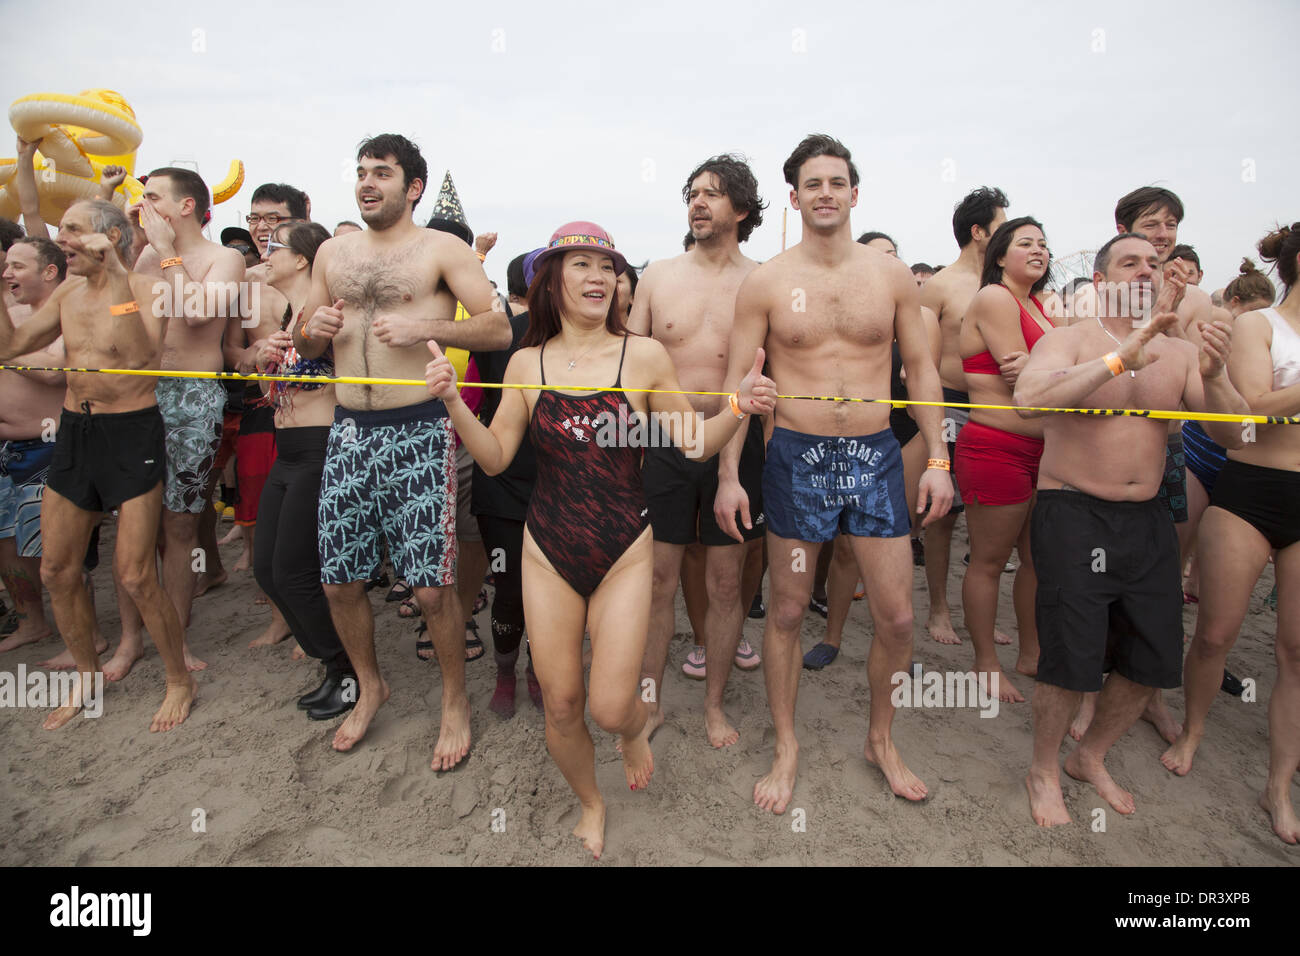 All sorts of people came out for the annual Polar Bear Club New Years Day 2014 plunge into the icy Atlantic at Coney Island. Stock Photo